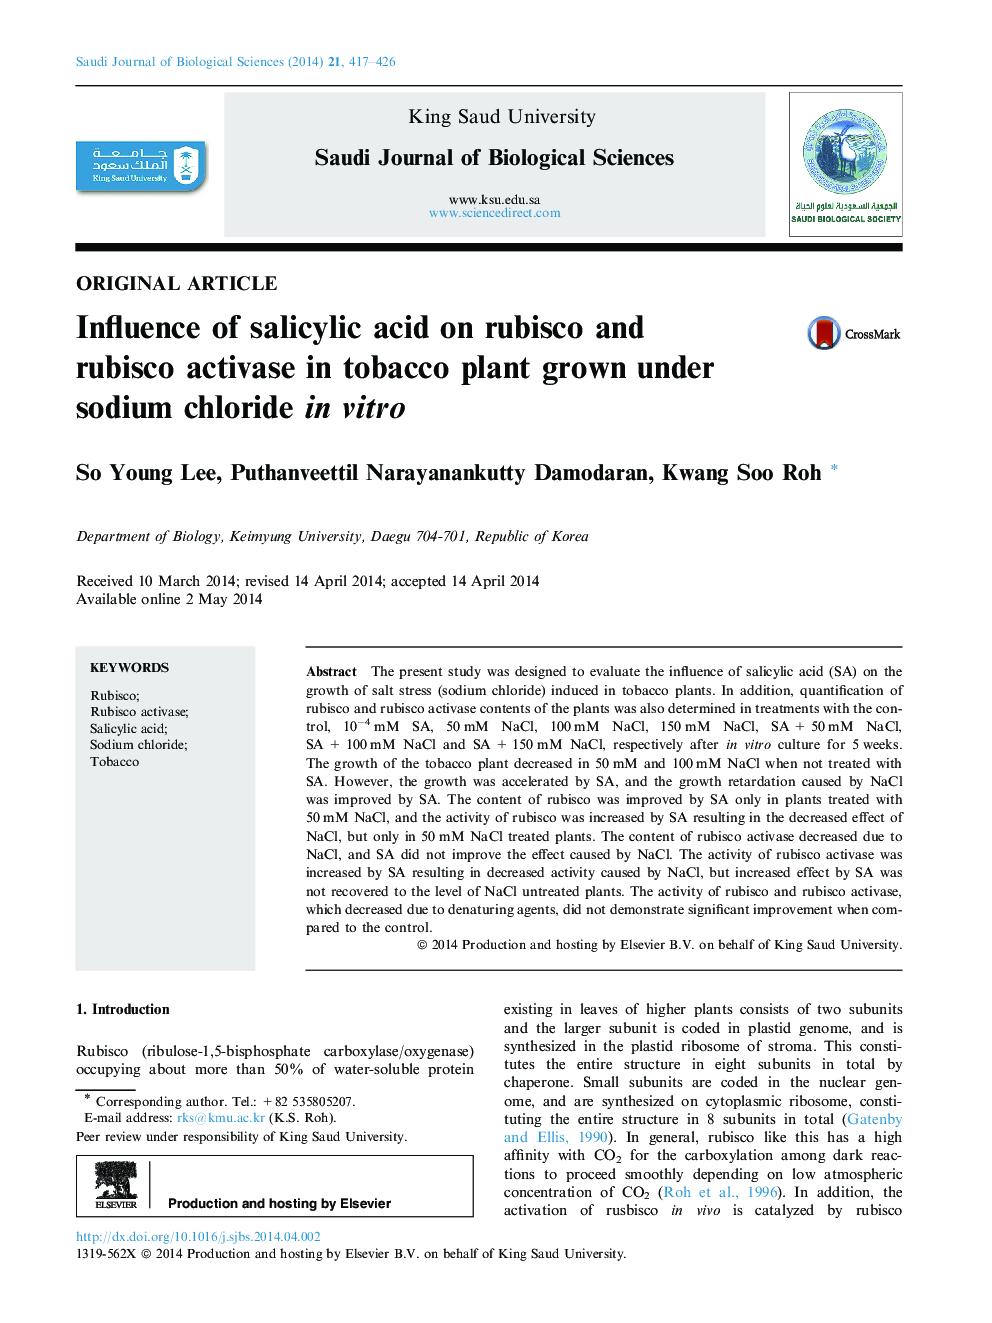 Influence of salicylic acid on rubisco and rubisco activase in tobacco plant grown under sodium chloride in vitro 